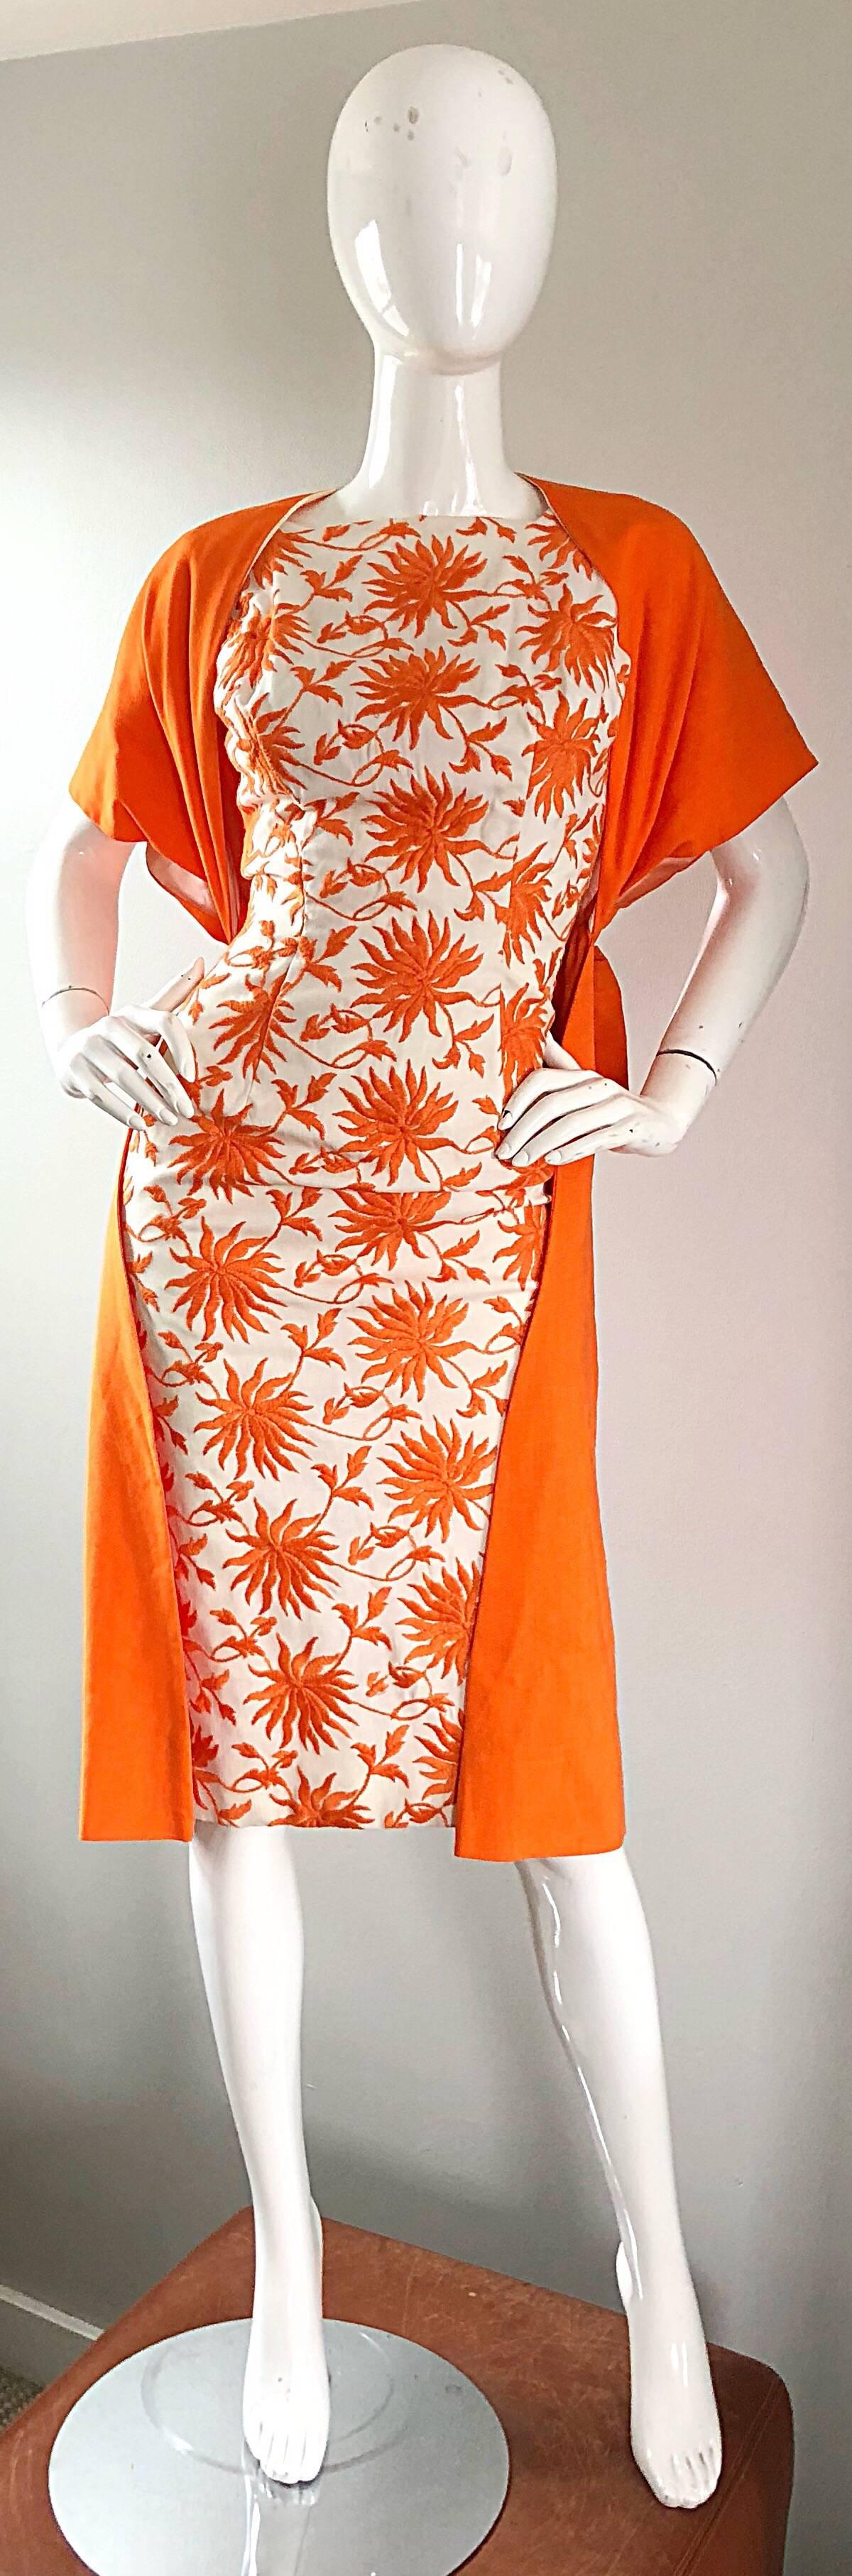 Sensational 1950s demi couture bright orange and ivory white embroidered flower sleeveless dress and short sleeve jacket! Features a fitted bodice, and wiggle body. Luxurious heavy cotton fabric. Full metal zipper up the back with hook-and-eye